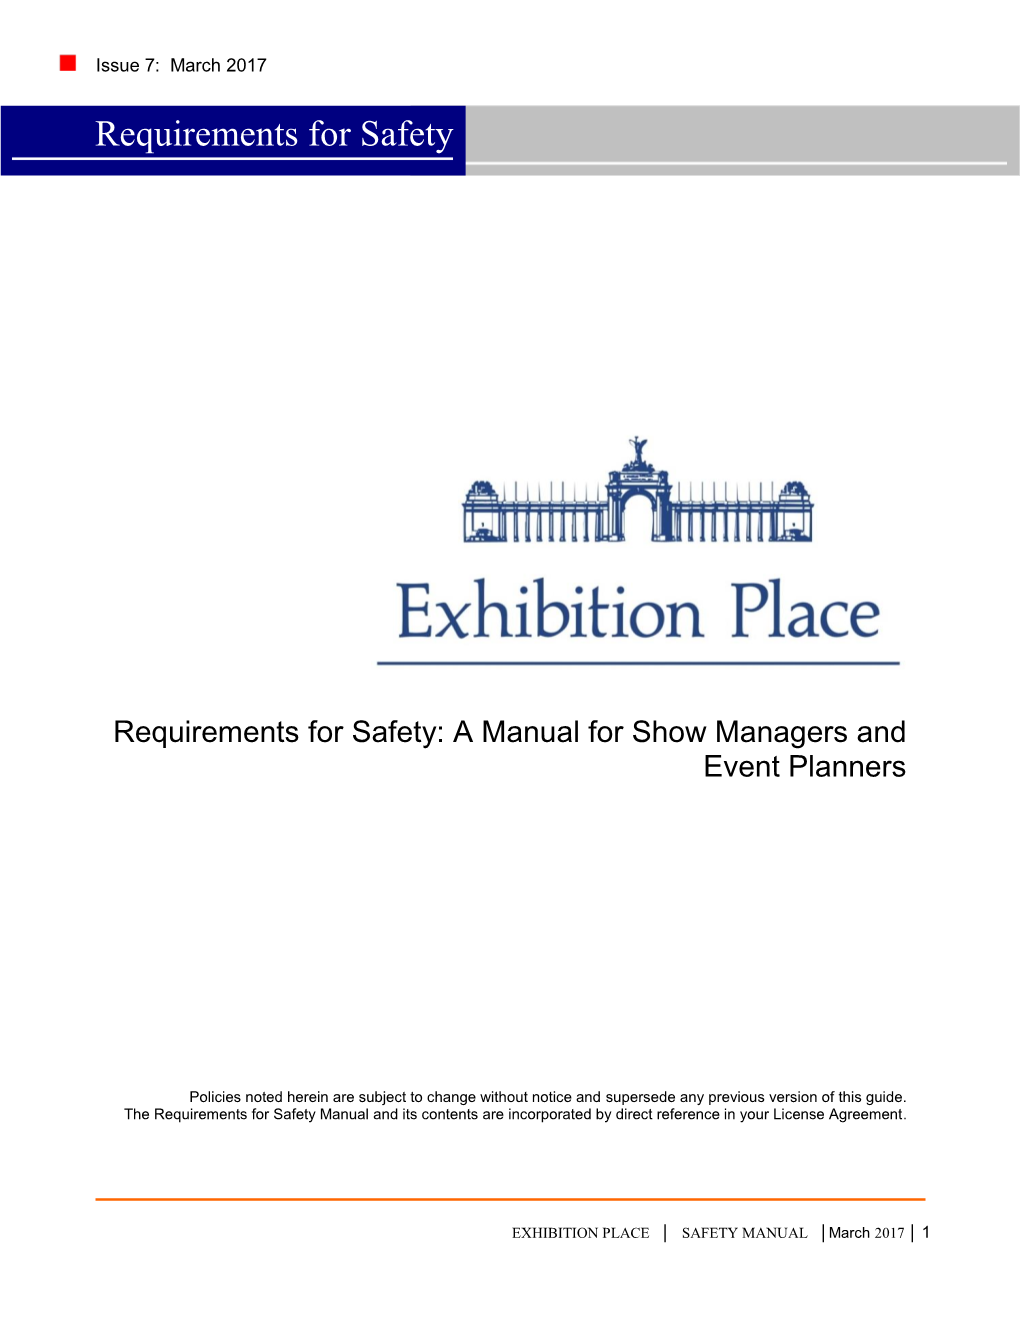 Requirements for Safety Manual Exhibition Place&lt;&gt;